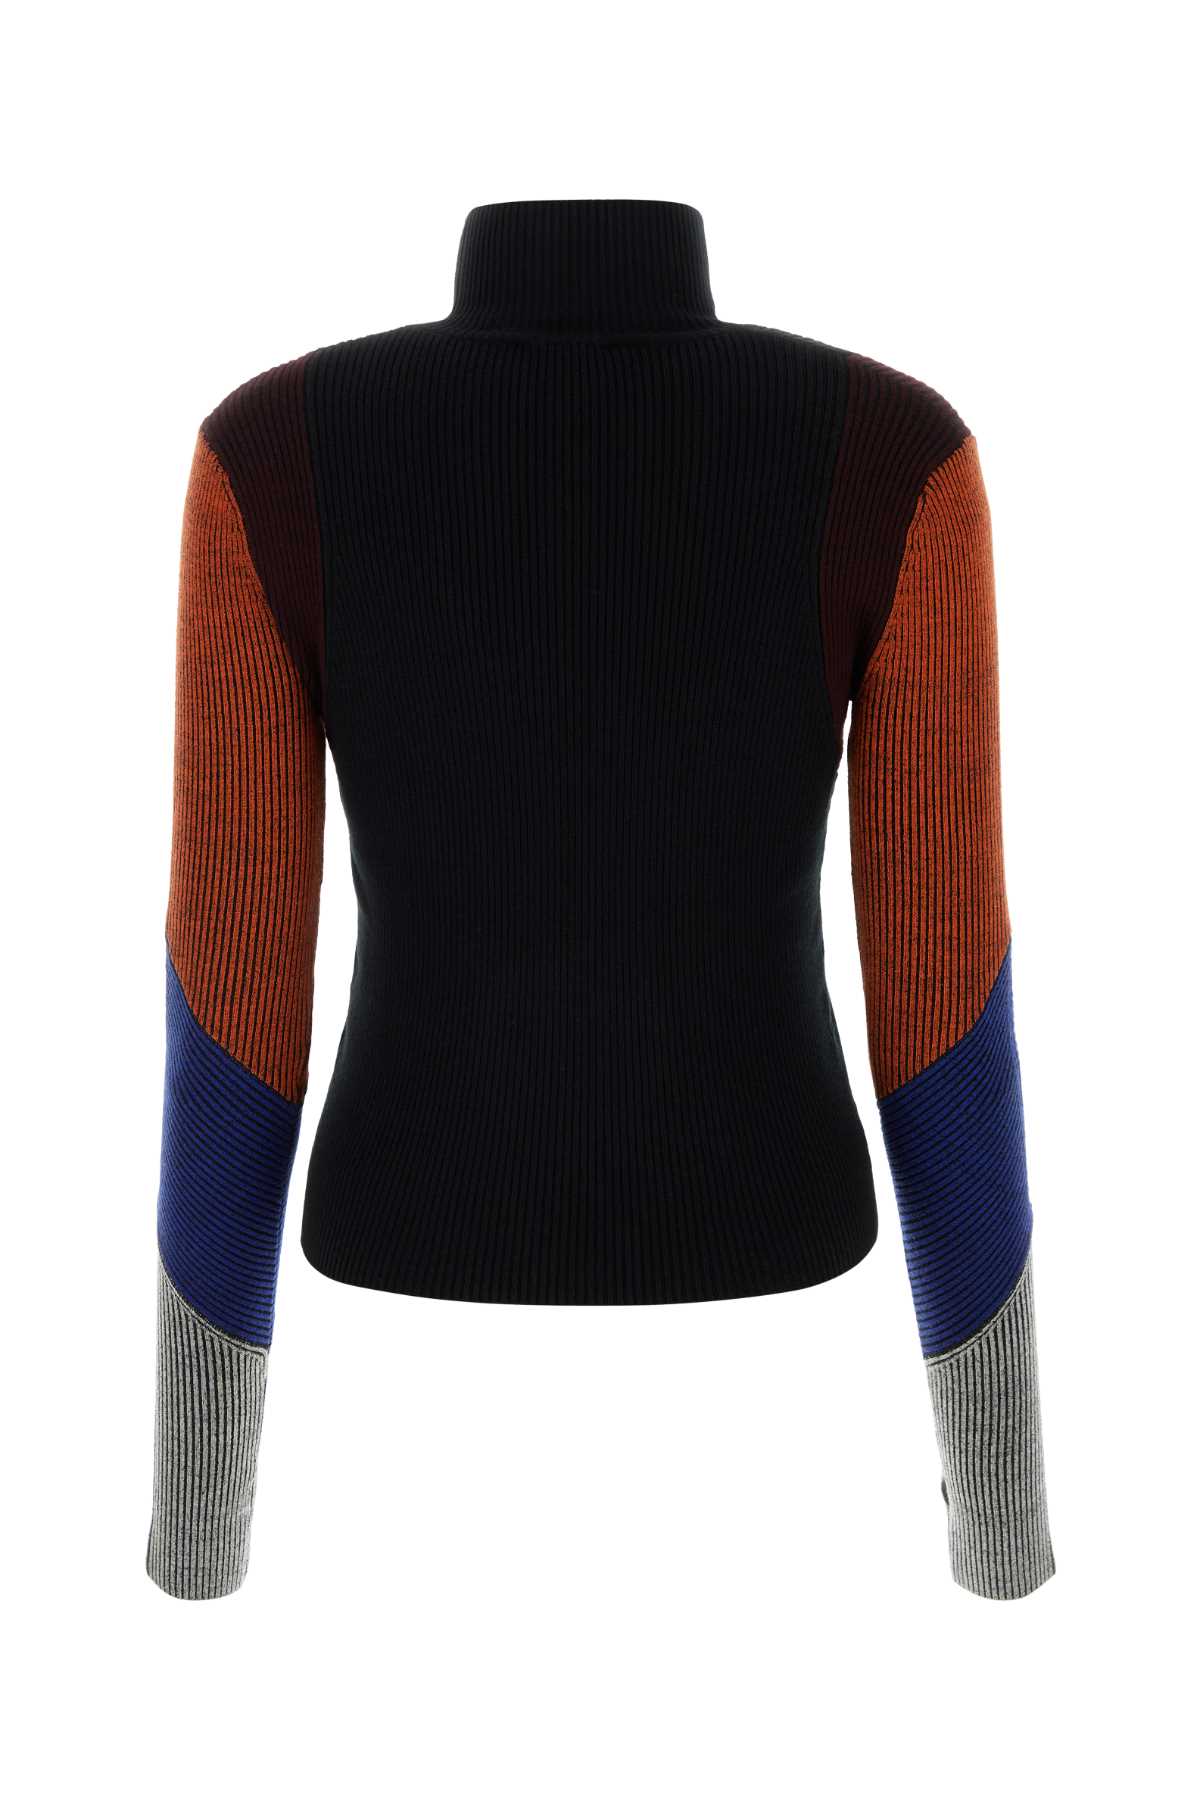 Chloé Black Stretch Wool Blend Sweater In Multicolor1